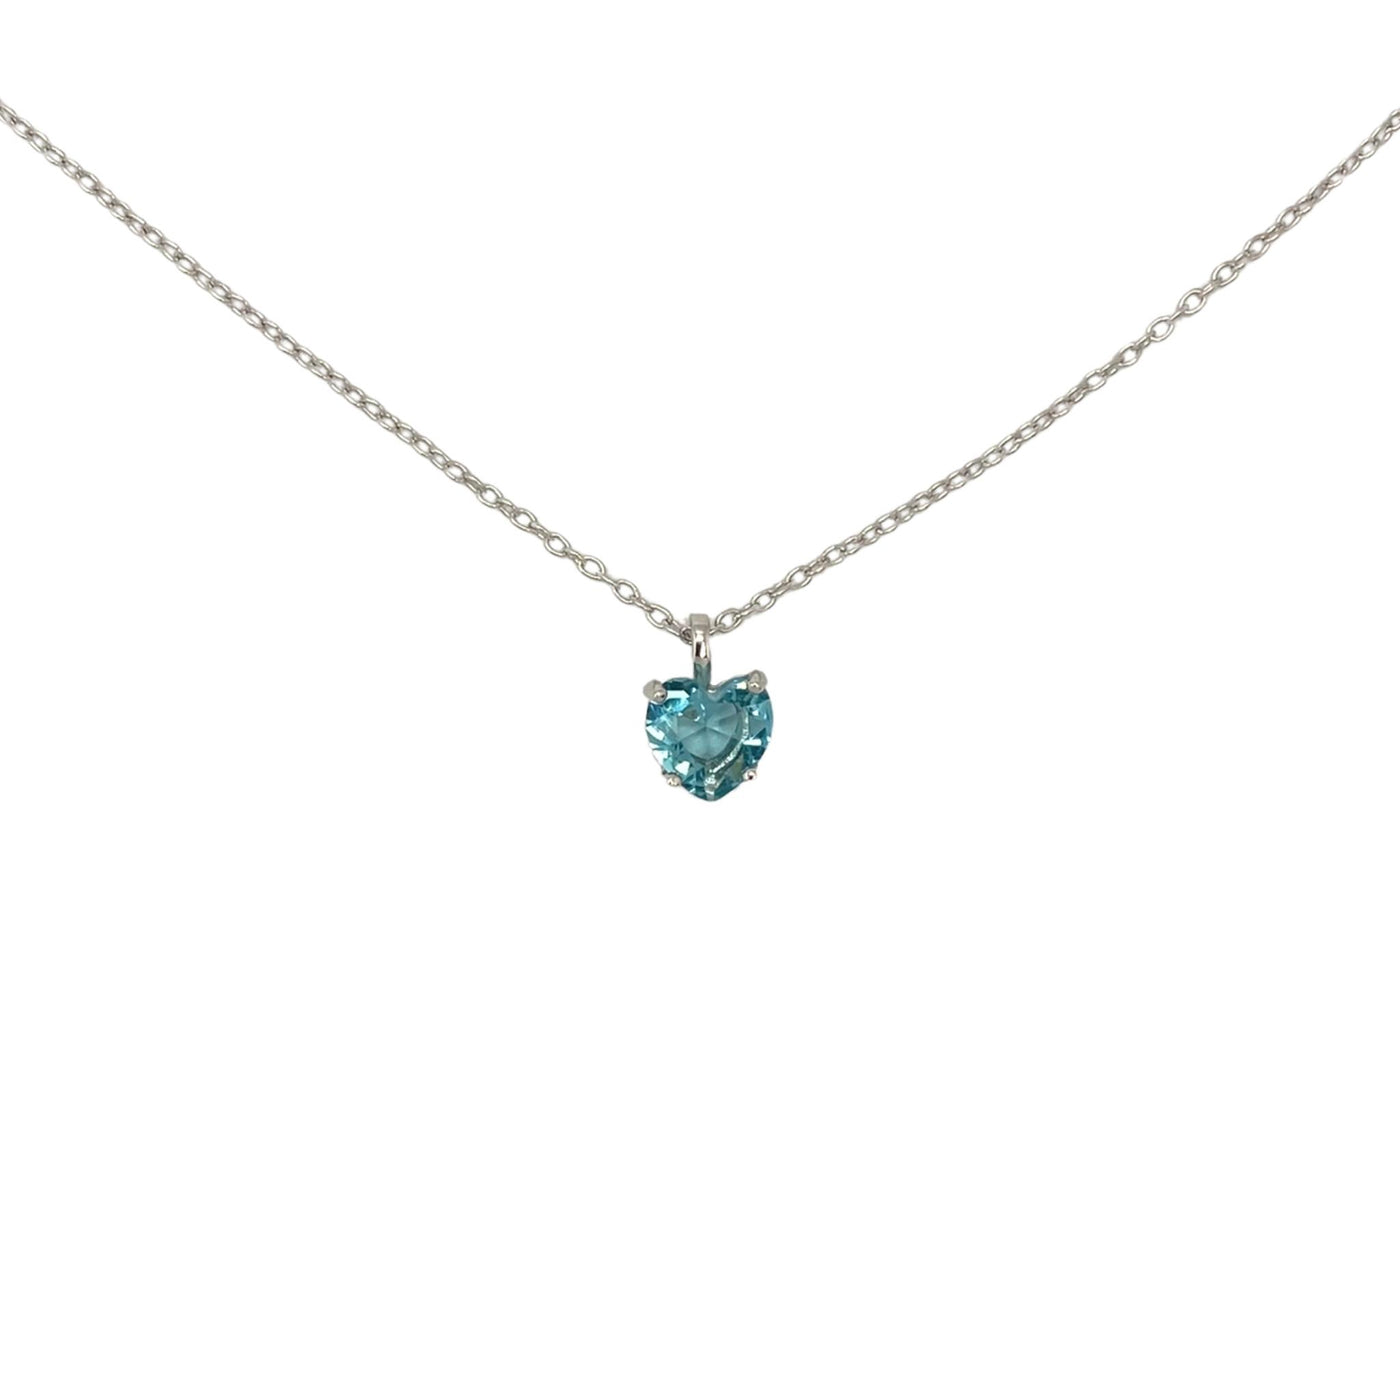 Silver necklace with heart charm - rhodium - 7 mm